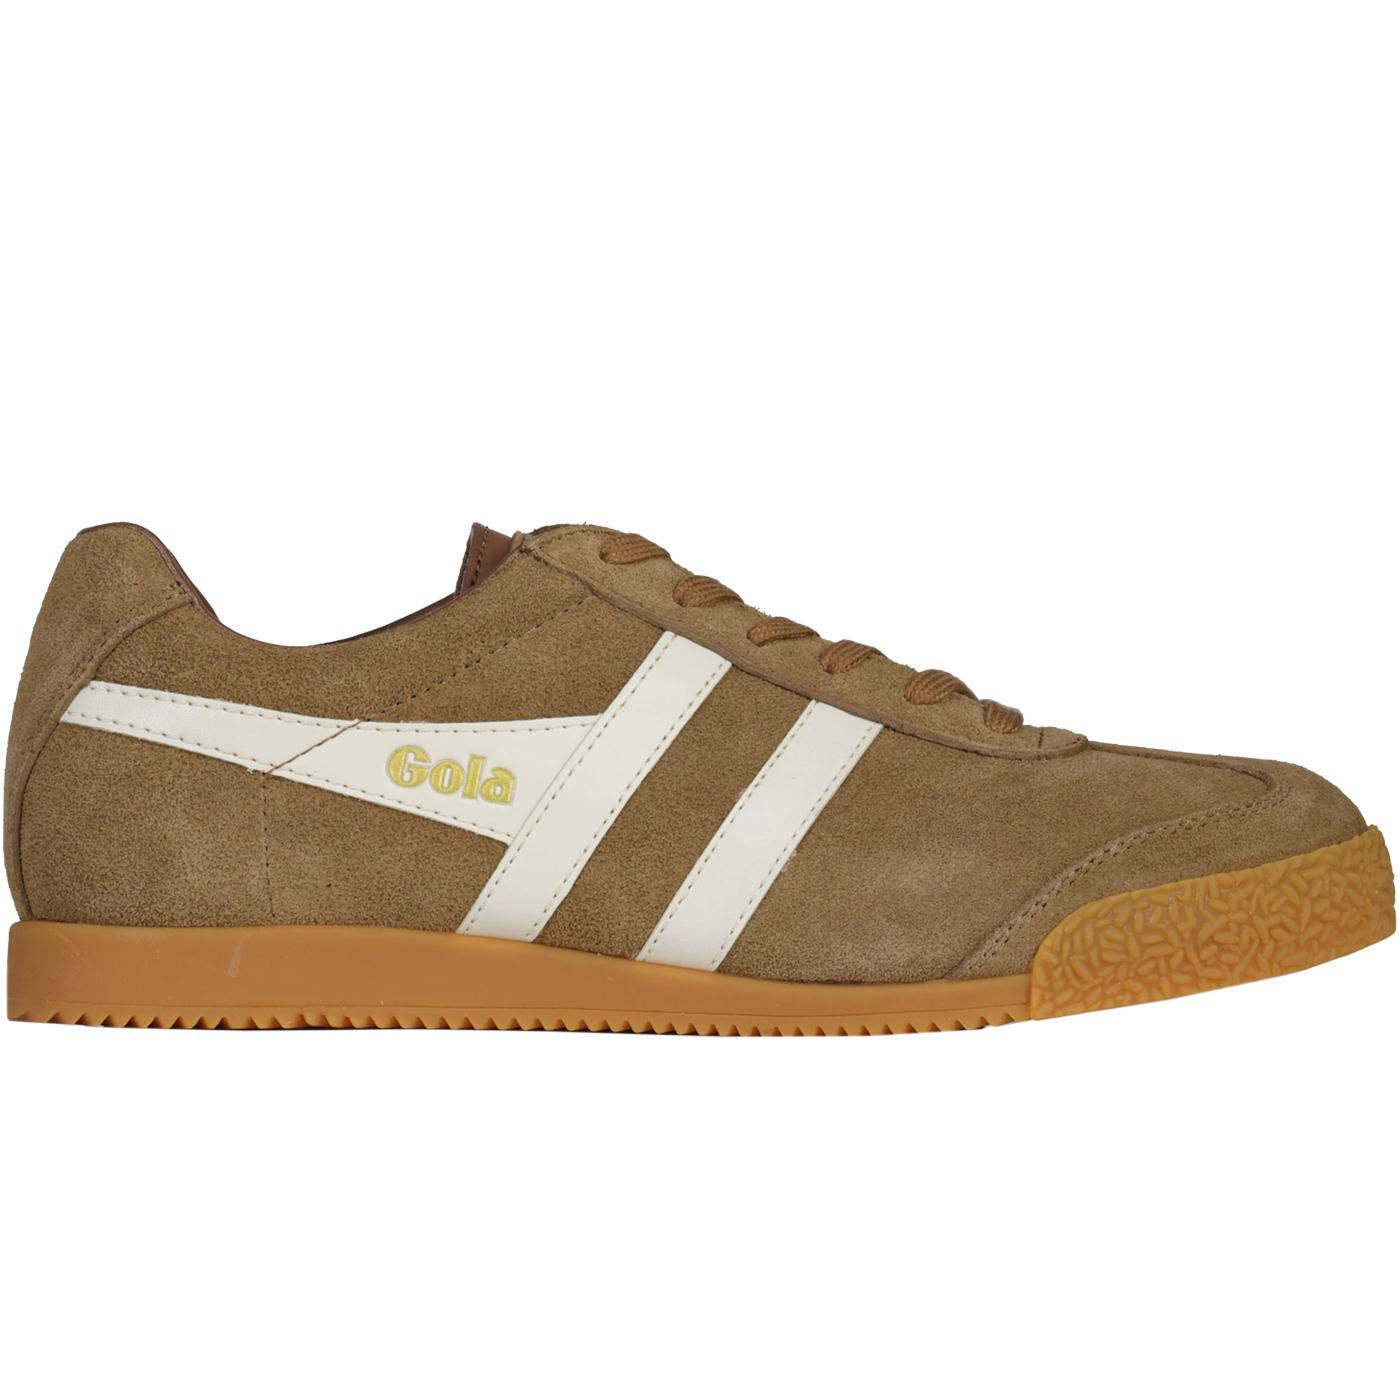 Gola Classics Harrier Suede Men's Causal Vintage Retro Trainers UK 7 Only 